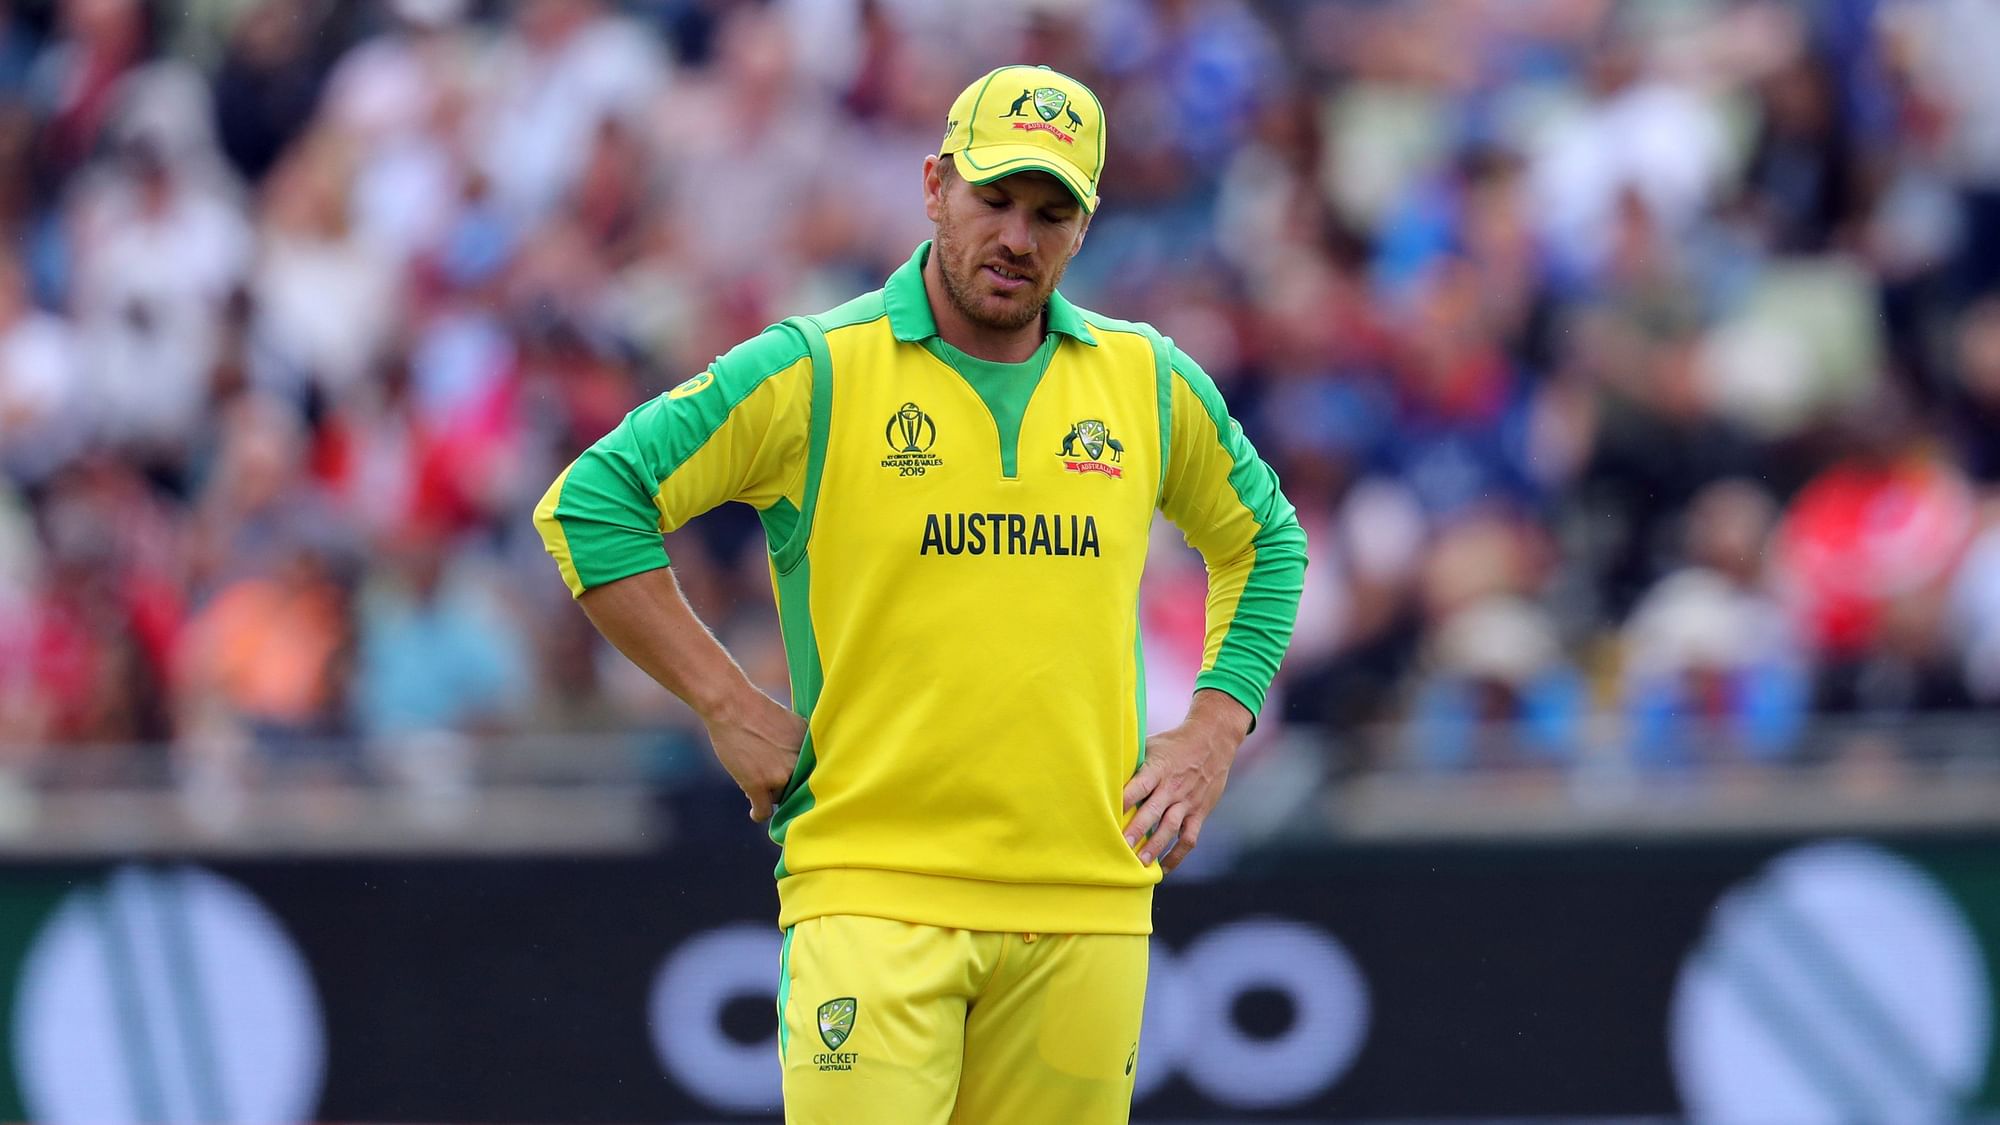 Australia’s limited-overs captain Aaron Finch fells there may be a postponement of this year’s T20 World Cup by up to three months.